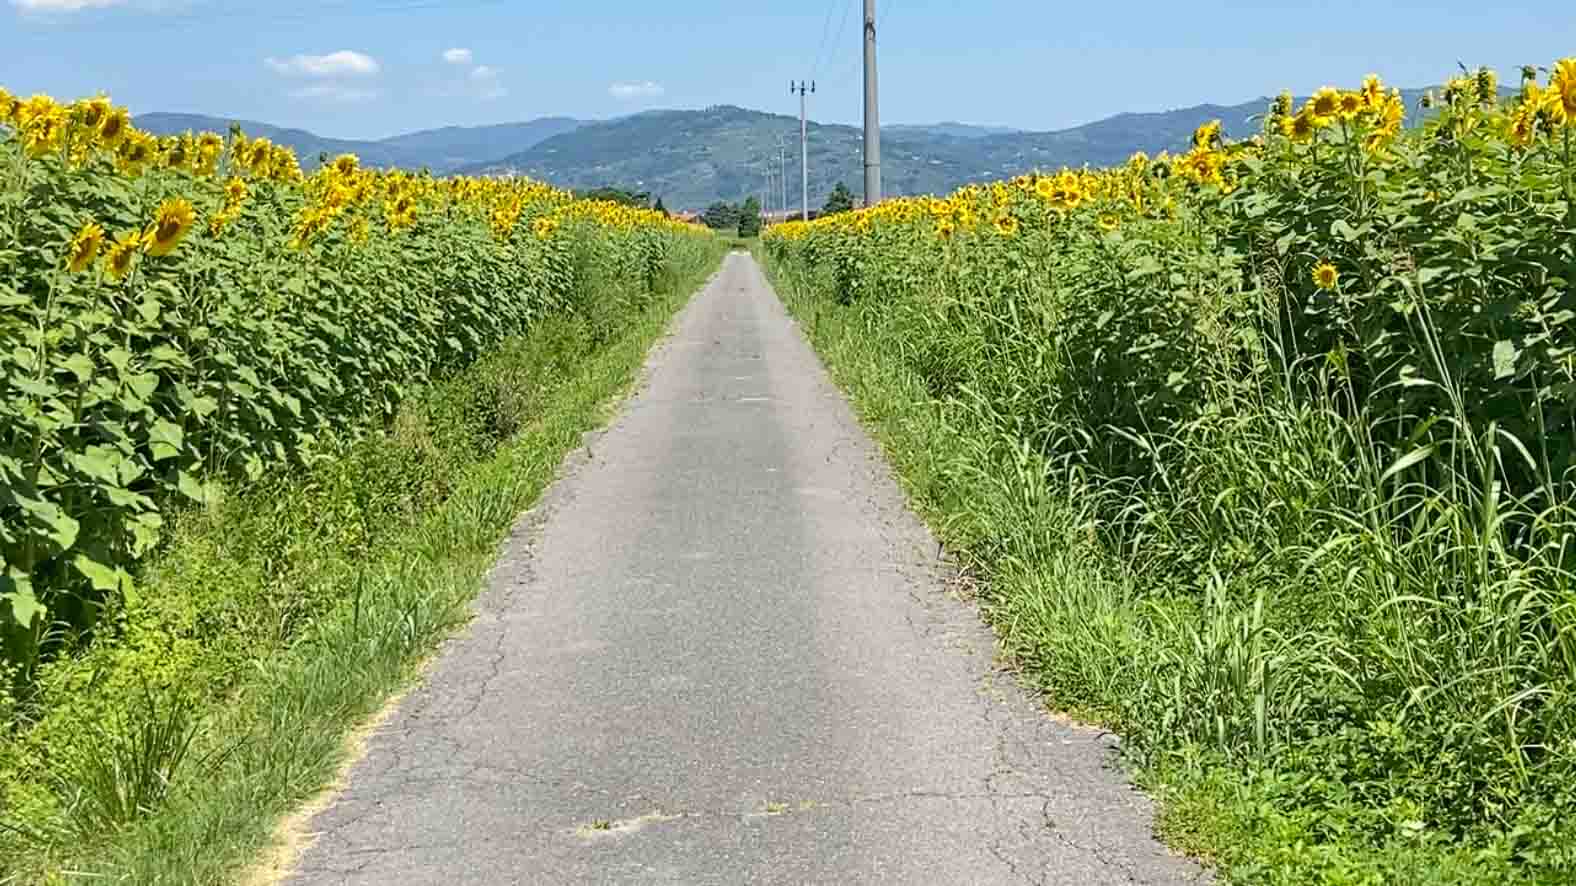 Cycling route through Tuscany's sunflowers